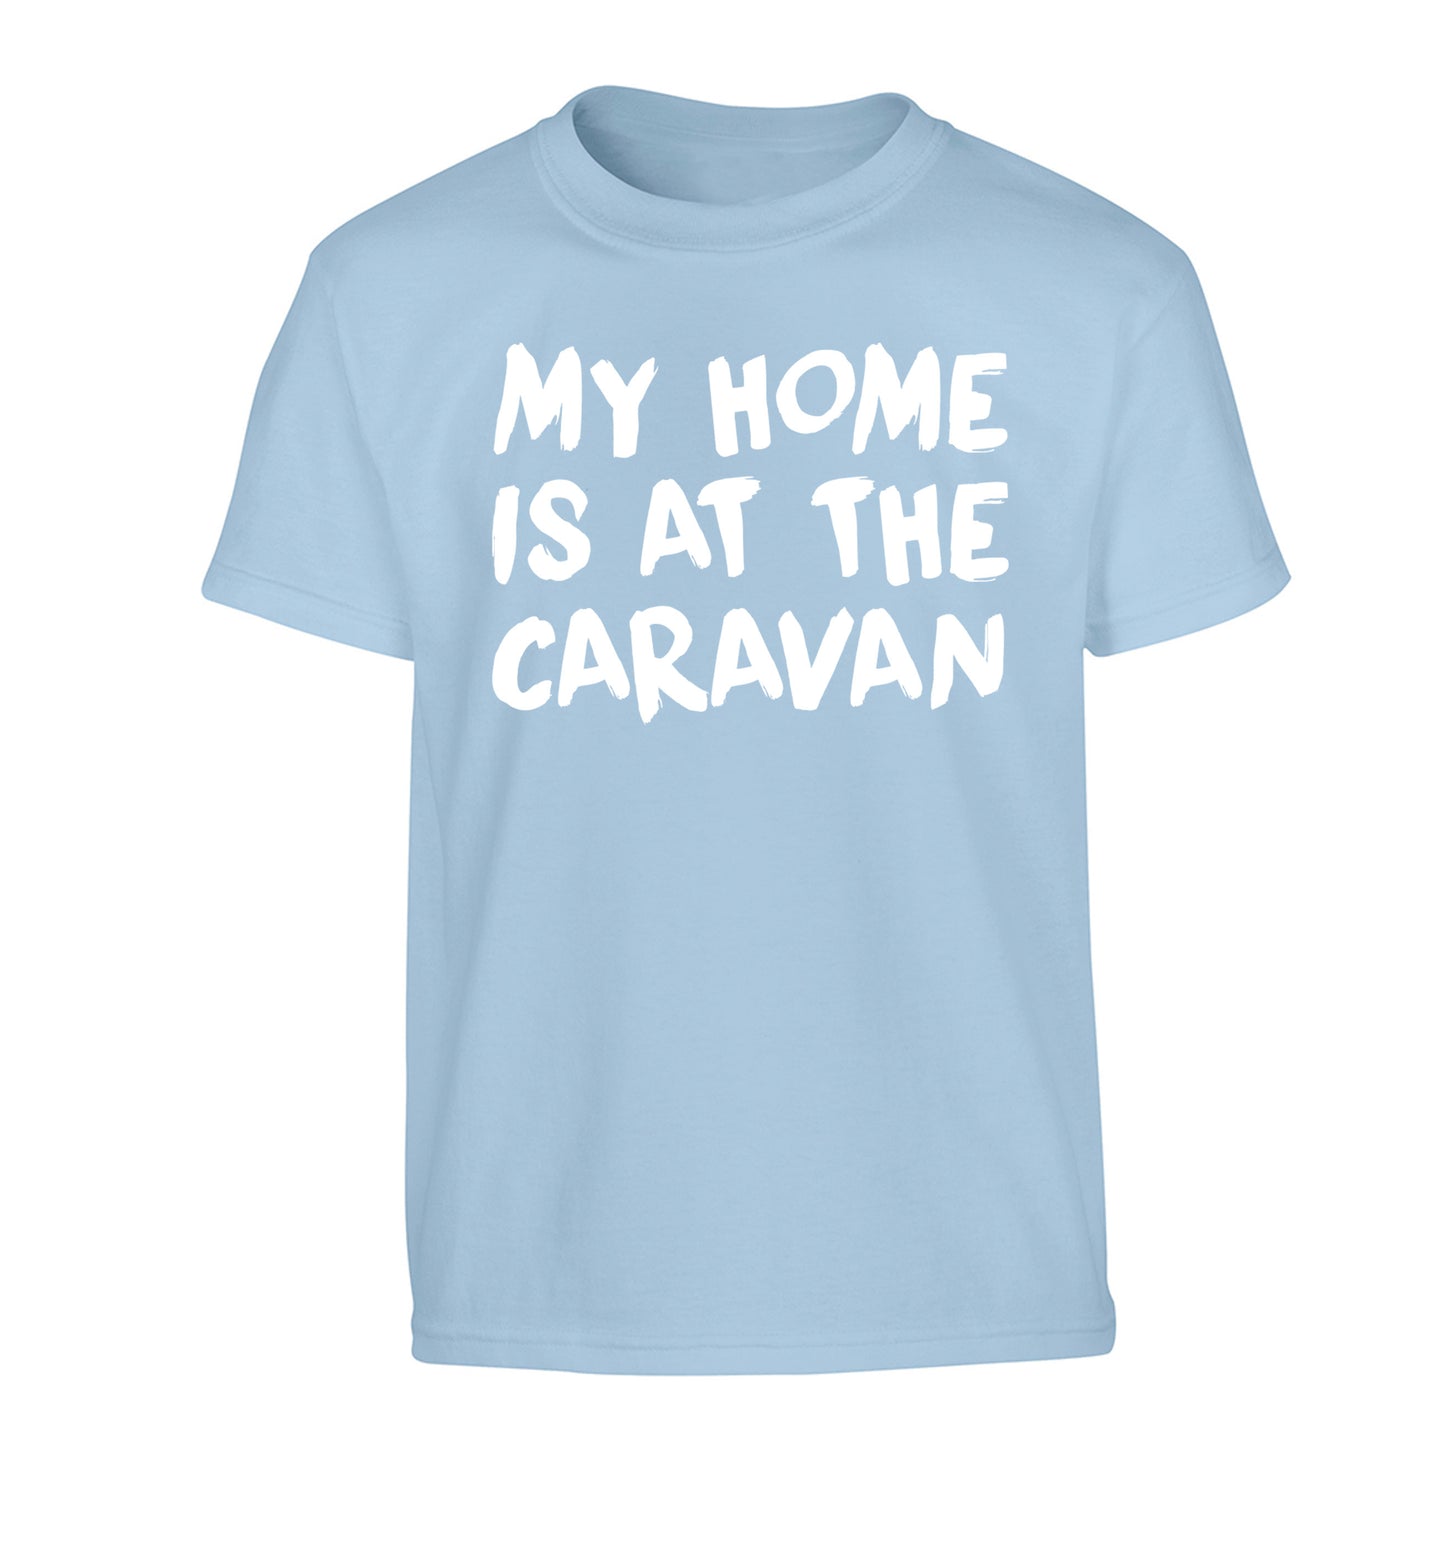 My home is at the caravan Children's light blue Tshirt 12-14 Years